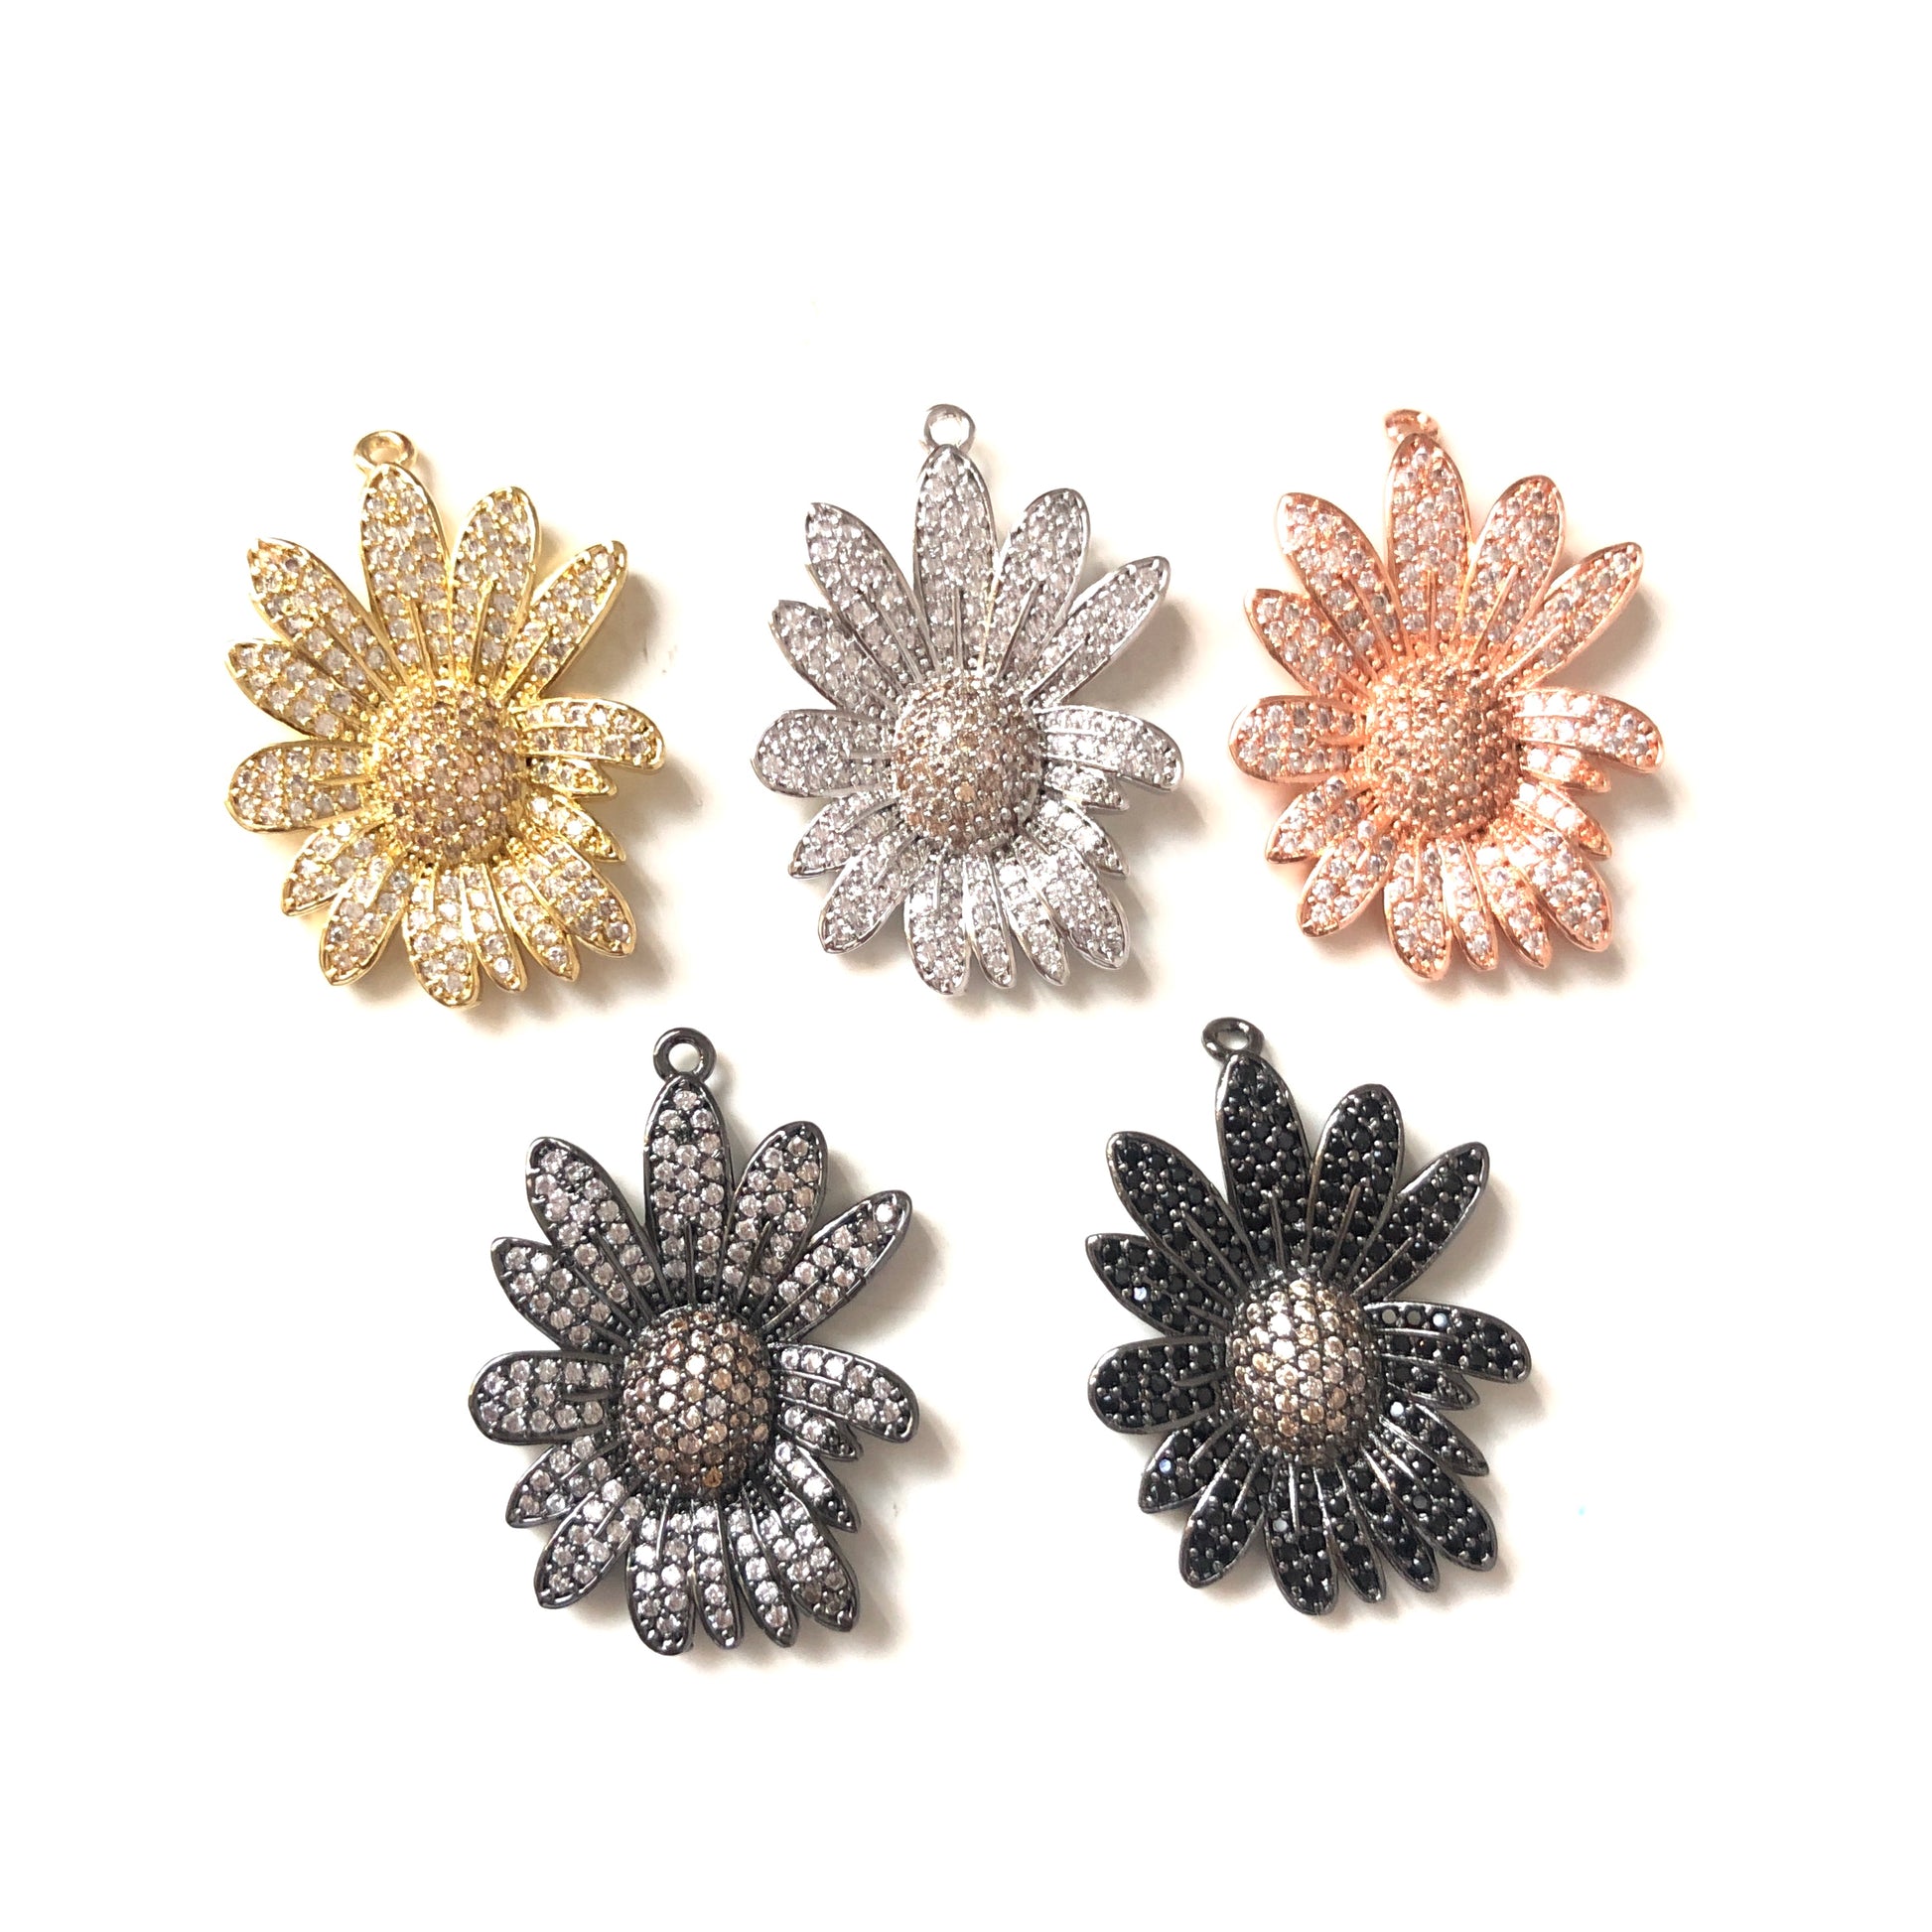 5-10pcs/lot 27.5*21.5mm CZ Paved Flower Charms CZ Paved Charms Flowers Charms Beads Beyond